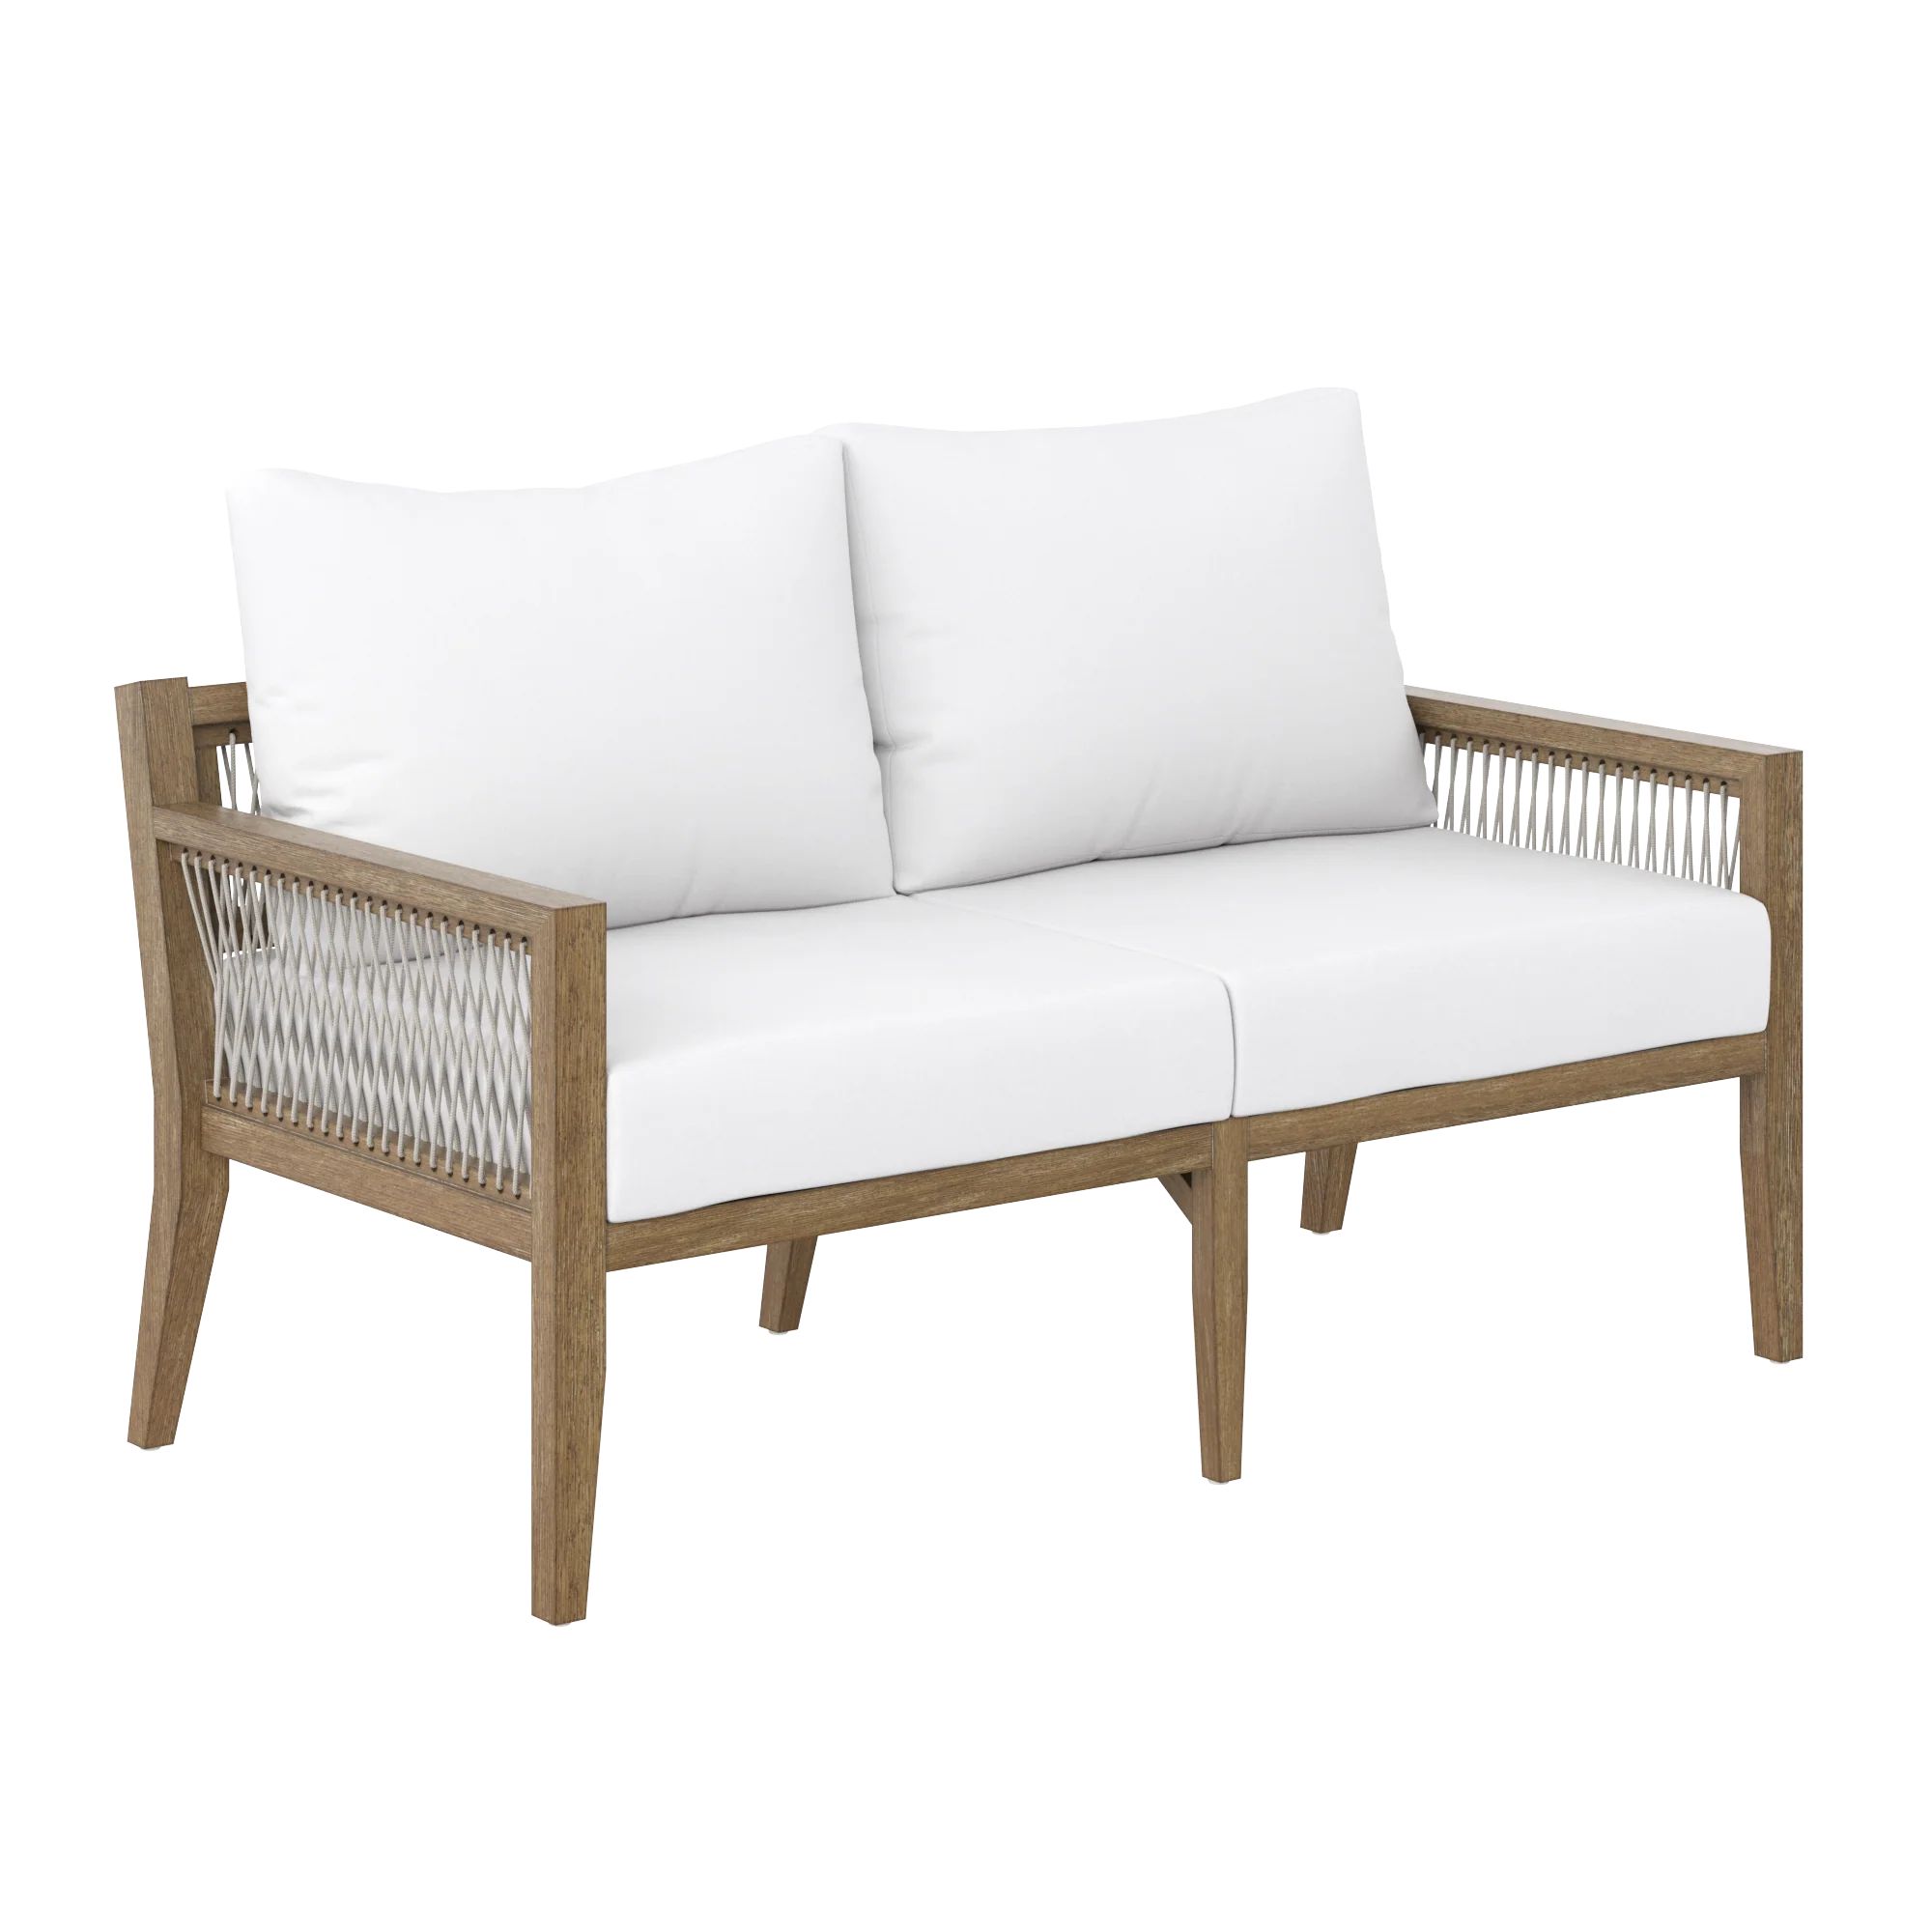 Wood & Rope Outdoor Patio Cushioned Loveseat | Nathan James